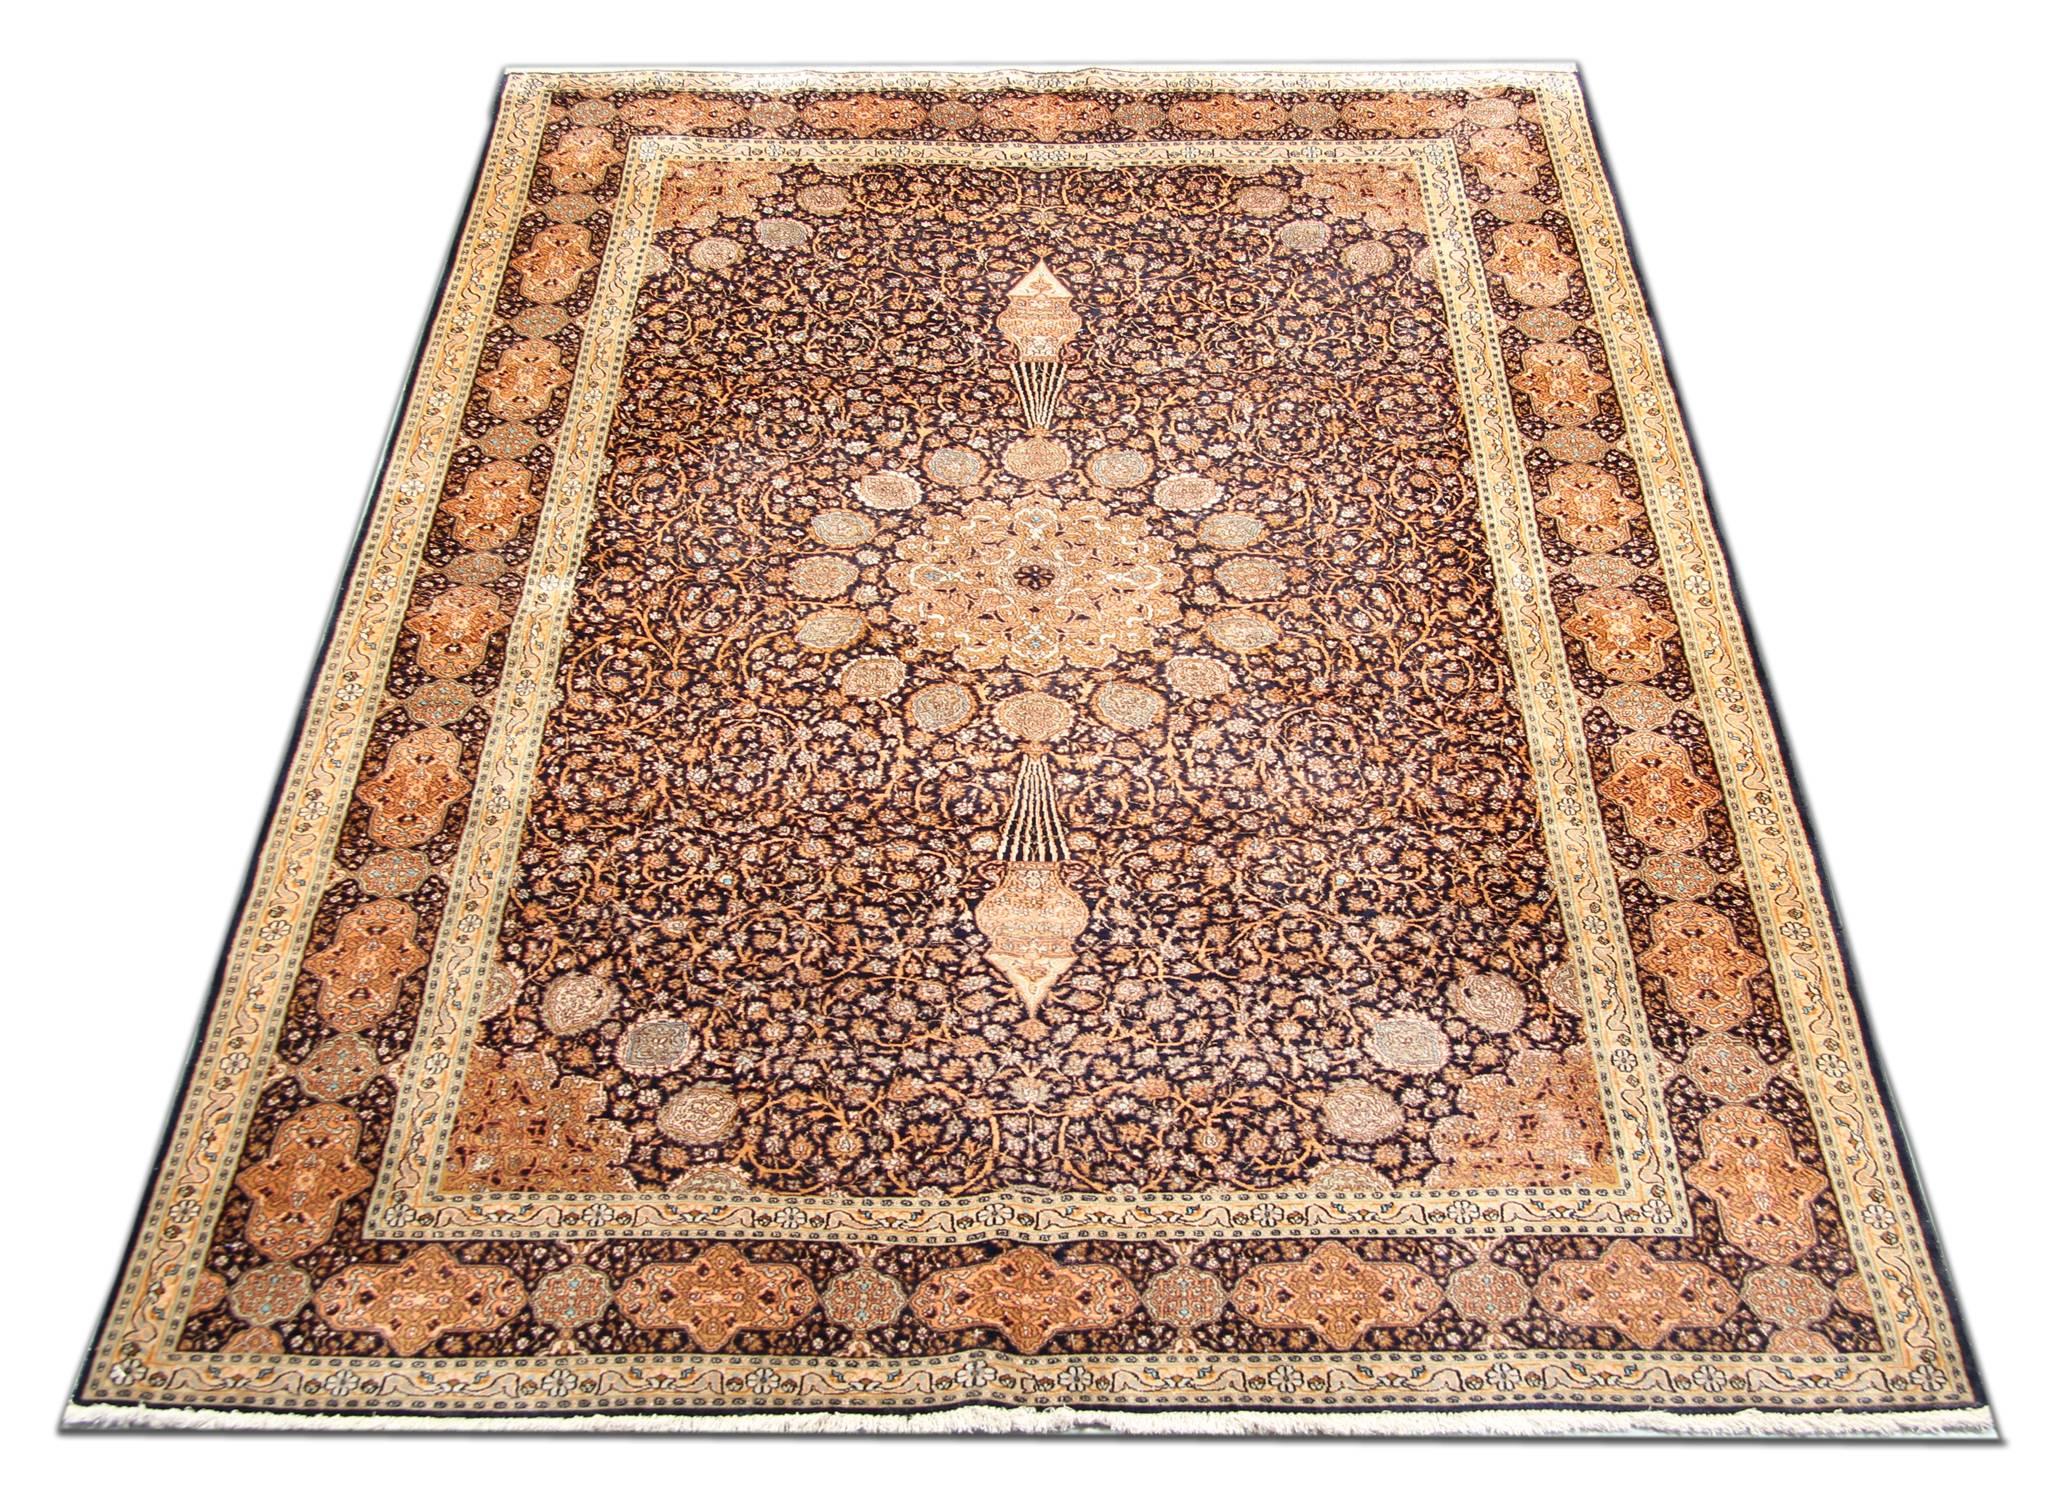 The manufacturing of these masterpieces handmade carpet Indian rugs began early the 20th century. The luxury rugs from Kashmir are known for their artistry with the pile of wool or silk. Those carpets and rugs are also often manufactured with high